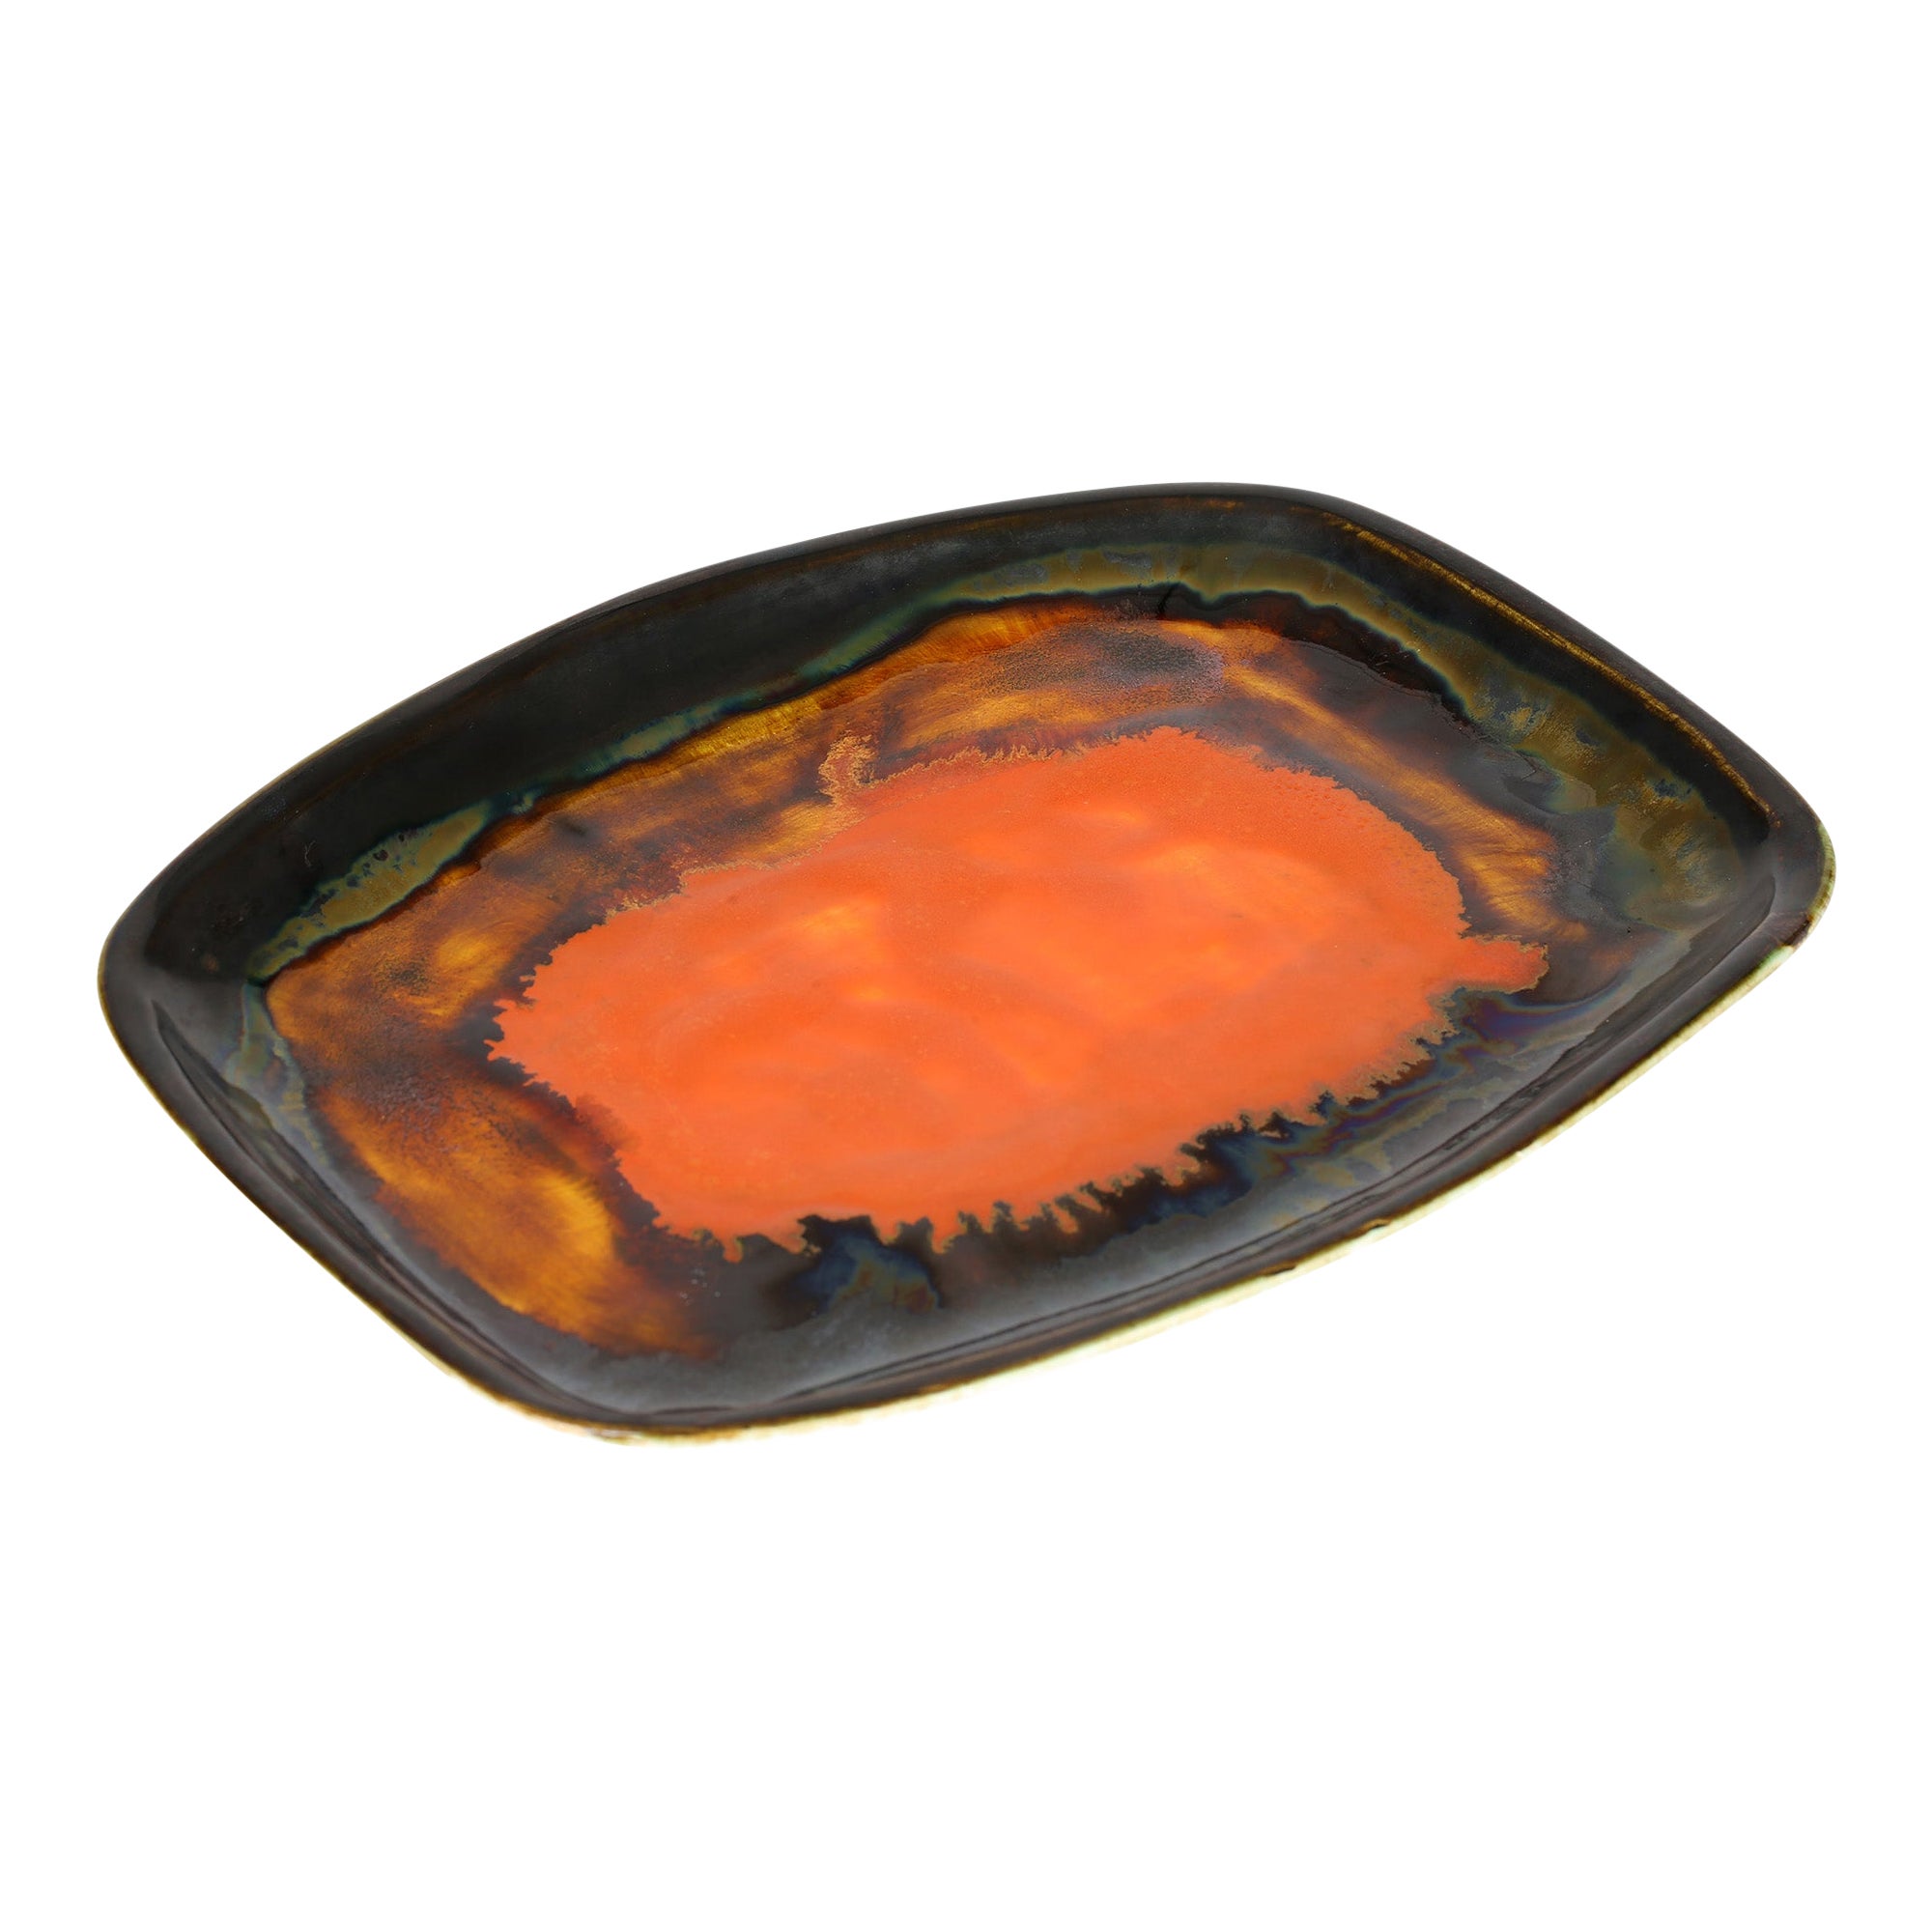 Eric Leaper Newlyn Studio Pottery Orange Glazed Tray or Shallow Dish For Sale